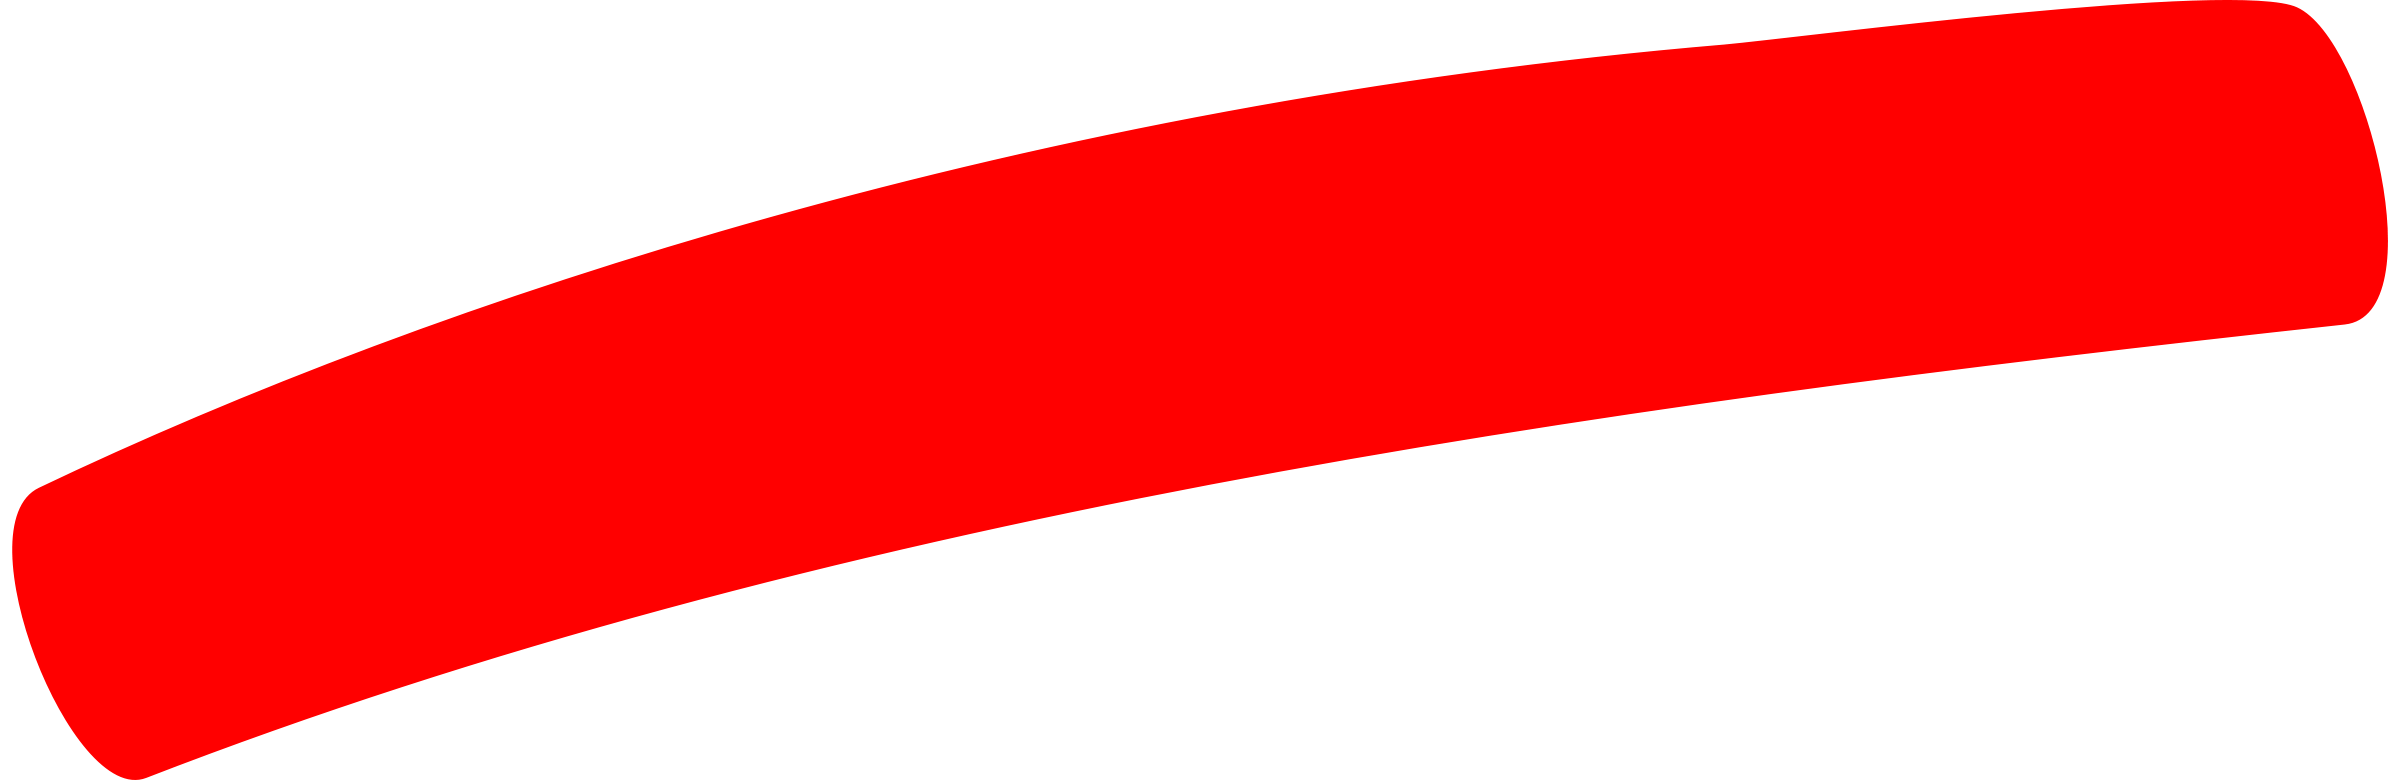 Clipart showing red x